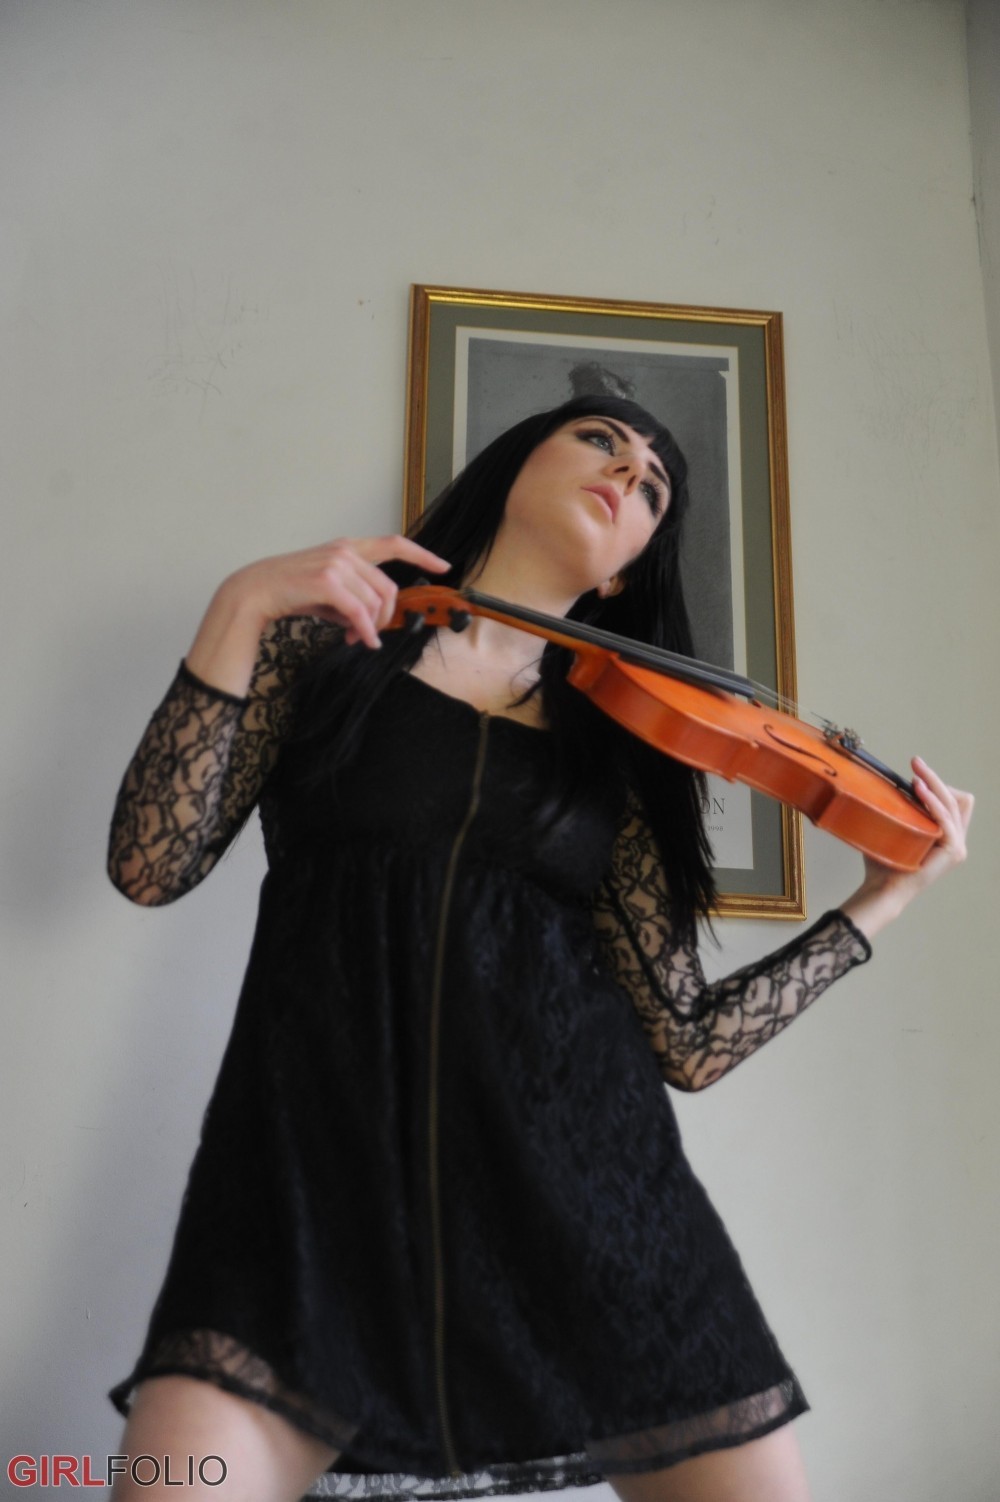 Leggy brunette stripping and posing with her violin #72426017